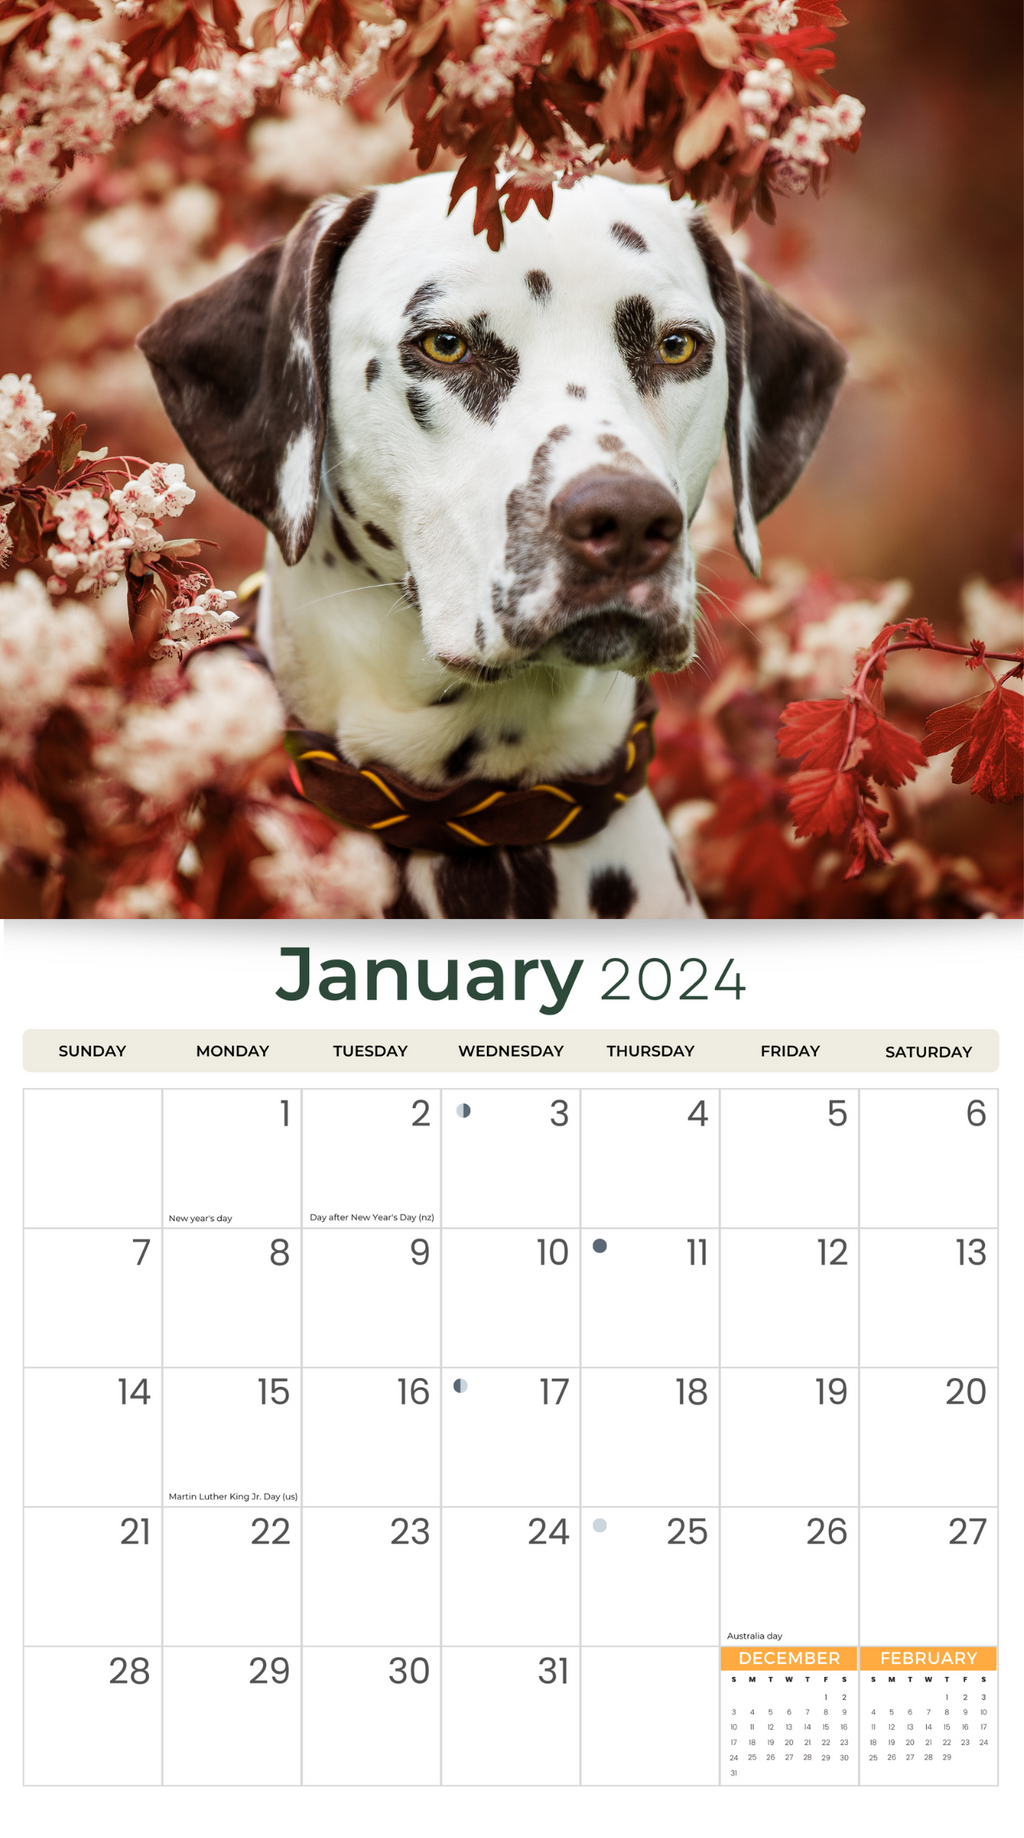 2024 Dalmatians Deluxe Wall Calendar Dogs & Puppies Calendars By